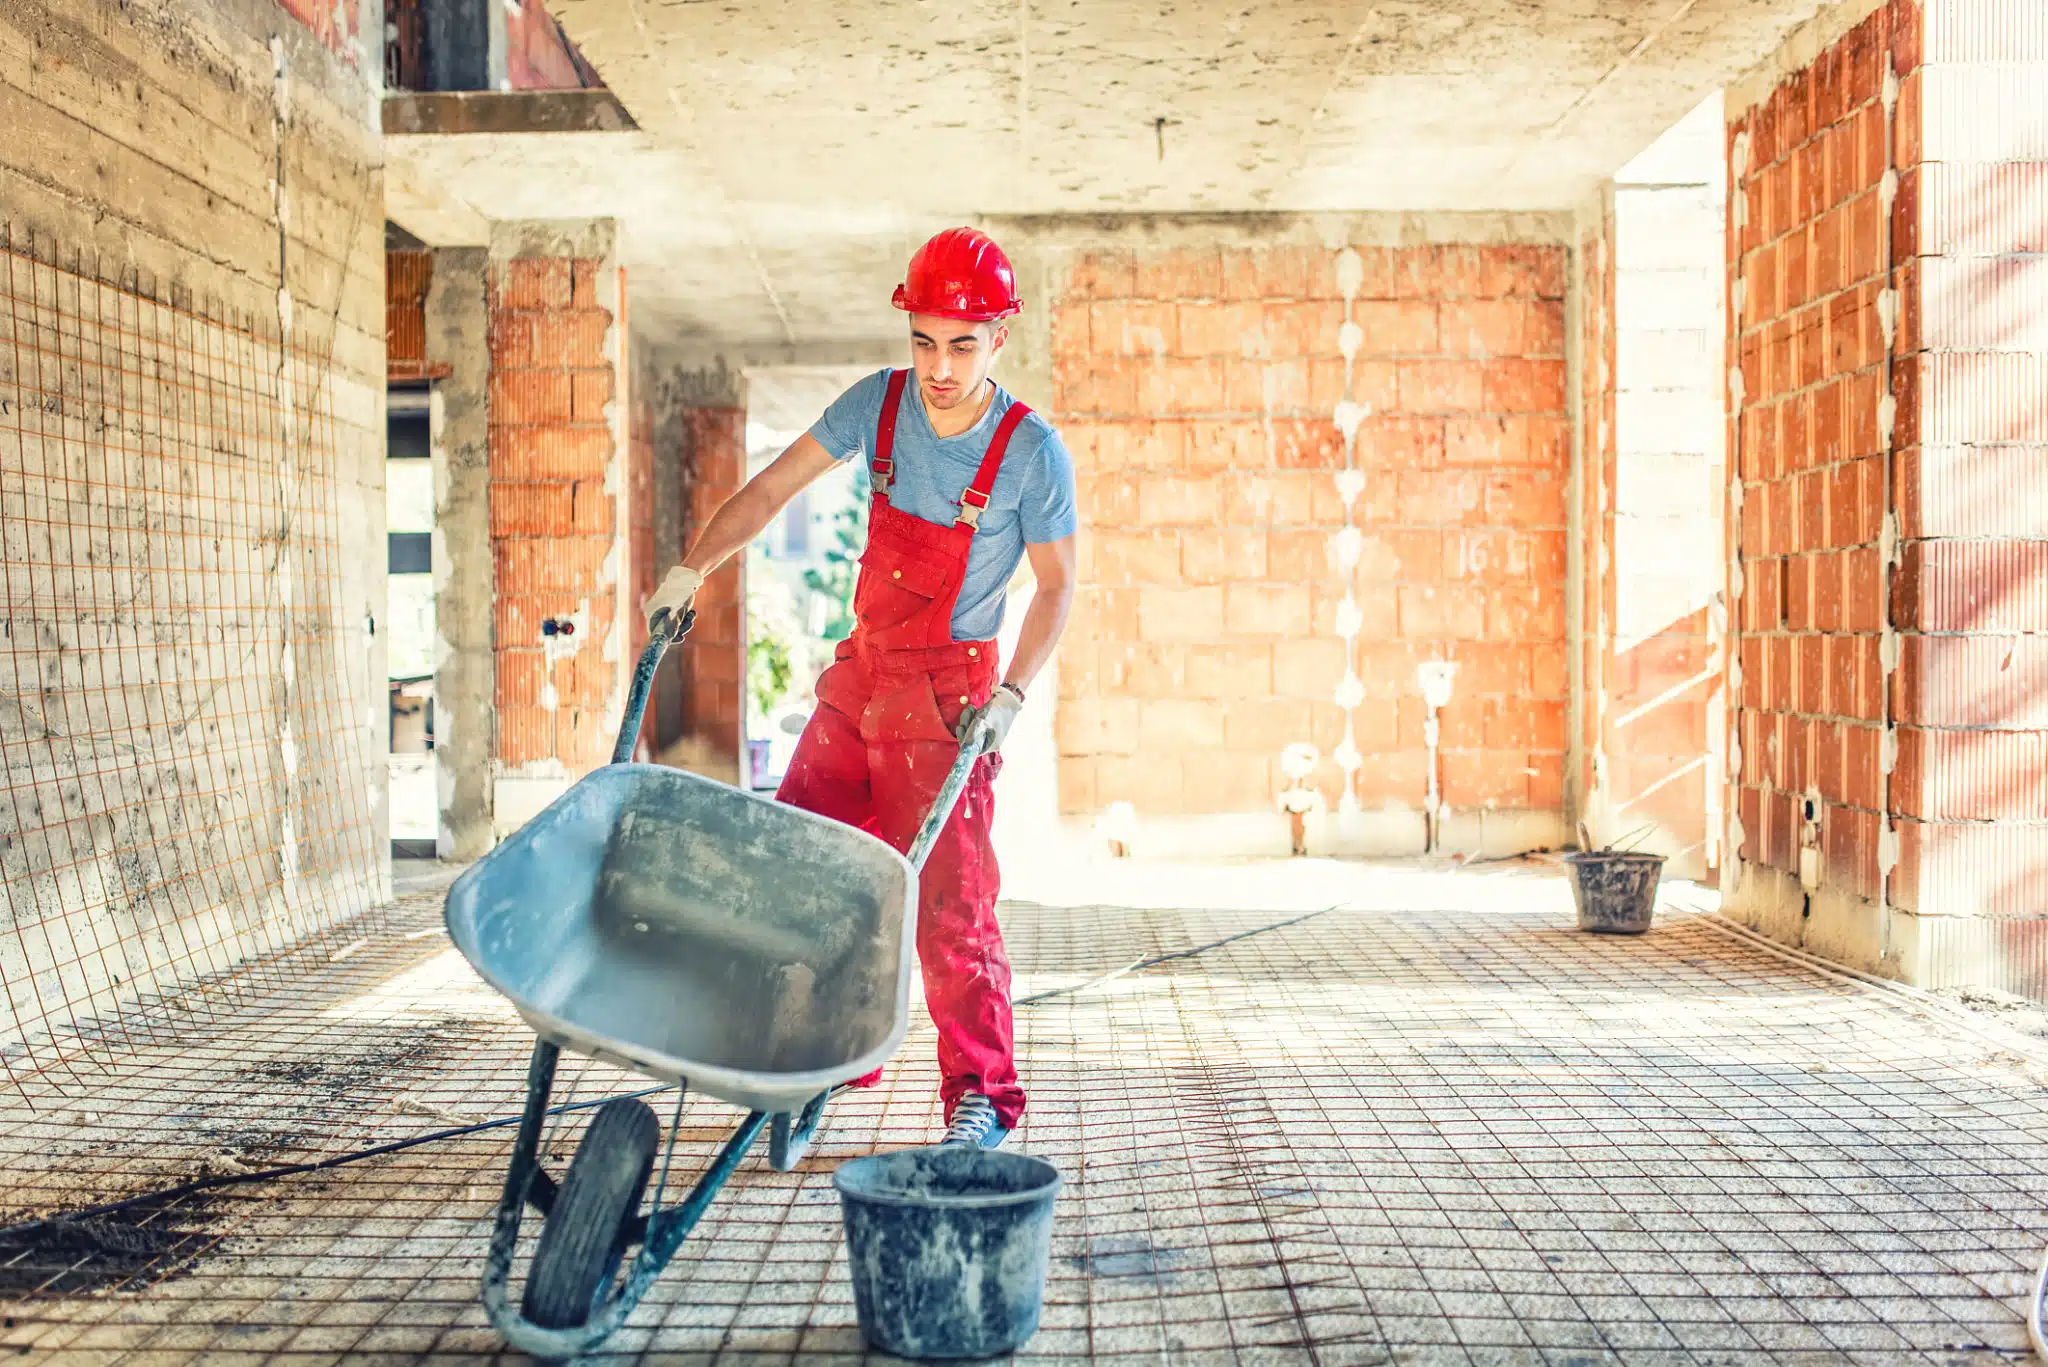 This image shows a construction worker wearing a red hard hat and red overalls standing in a partially constructed building The worker is pushing a wheelbarrow filled with construction materials likely cement or mortar across the concrete floor of the unfinished interior The walls are made of exposed bricks and there is natural light coming in through openings in the structure The scene depicts an active construction site where the worker is engaged in the process of building or renovating the structure